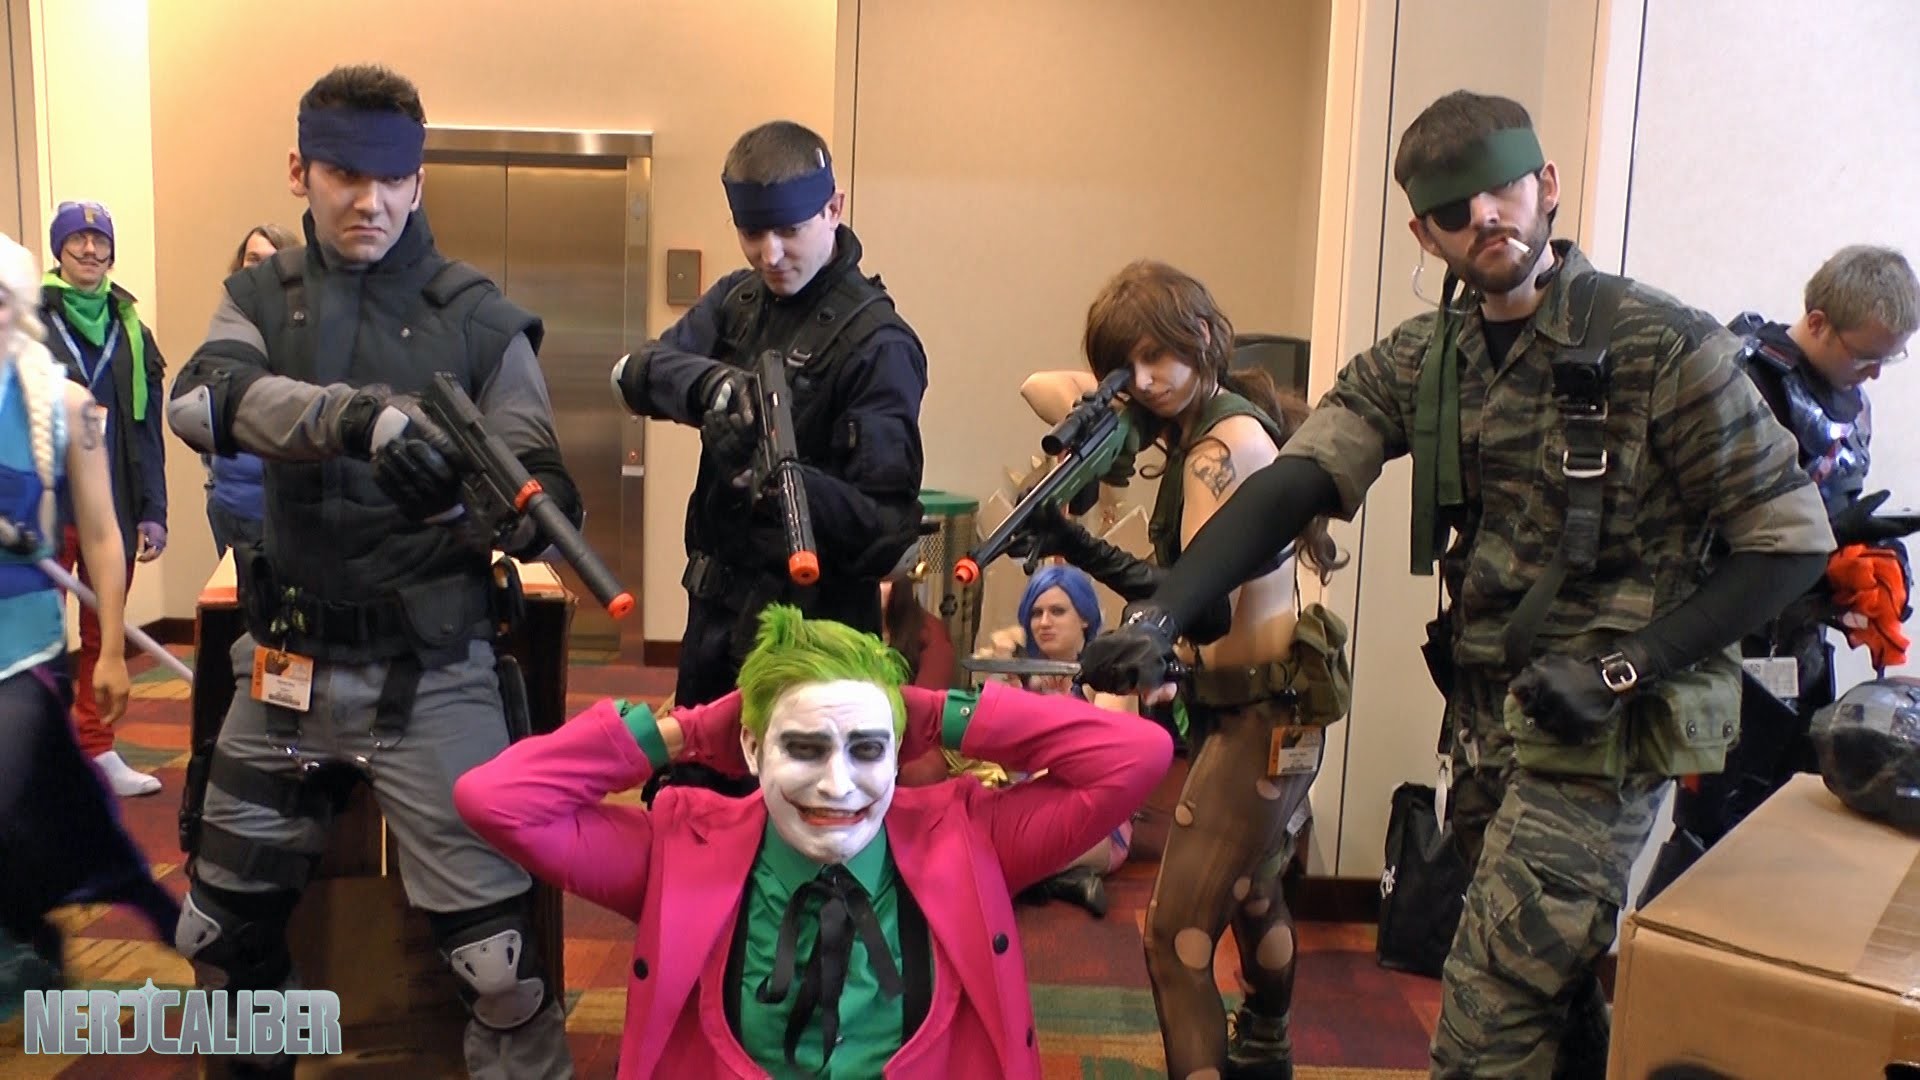 1920x1080 Solid Snakes, Big Boss and Quiet! Metal Gear Solid Cosplay at Gen Con 2014  - YouTube